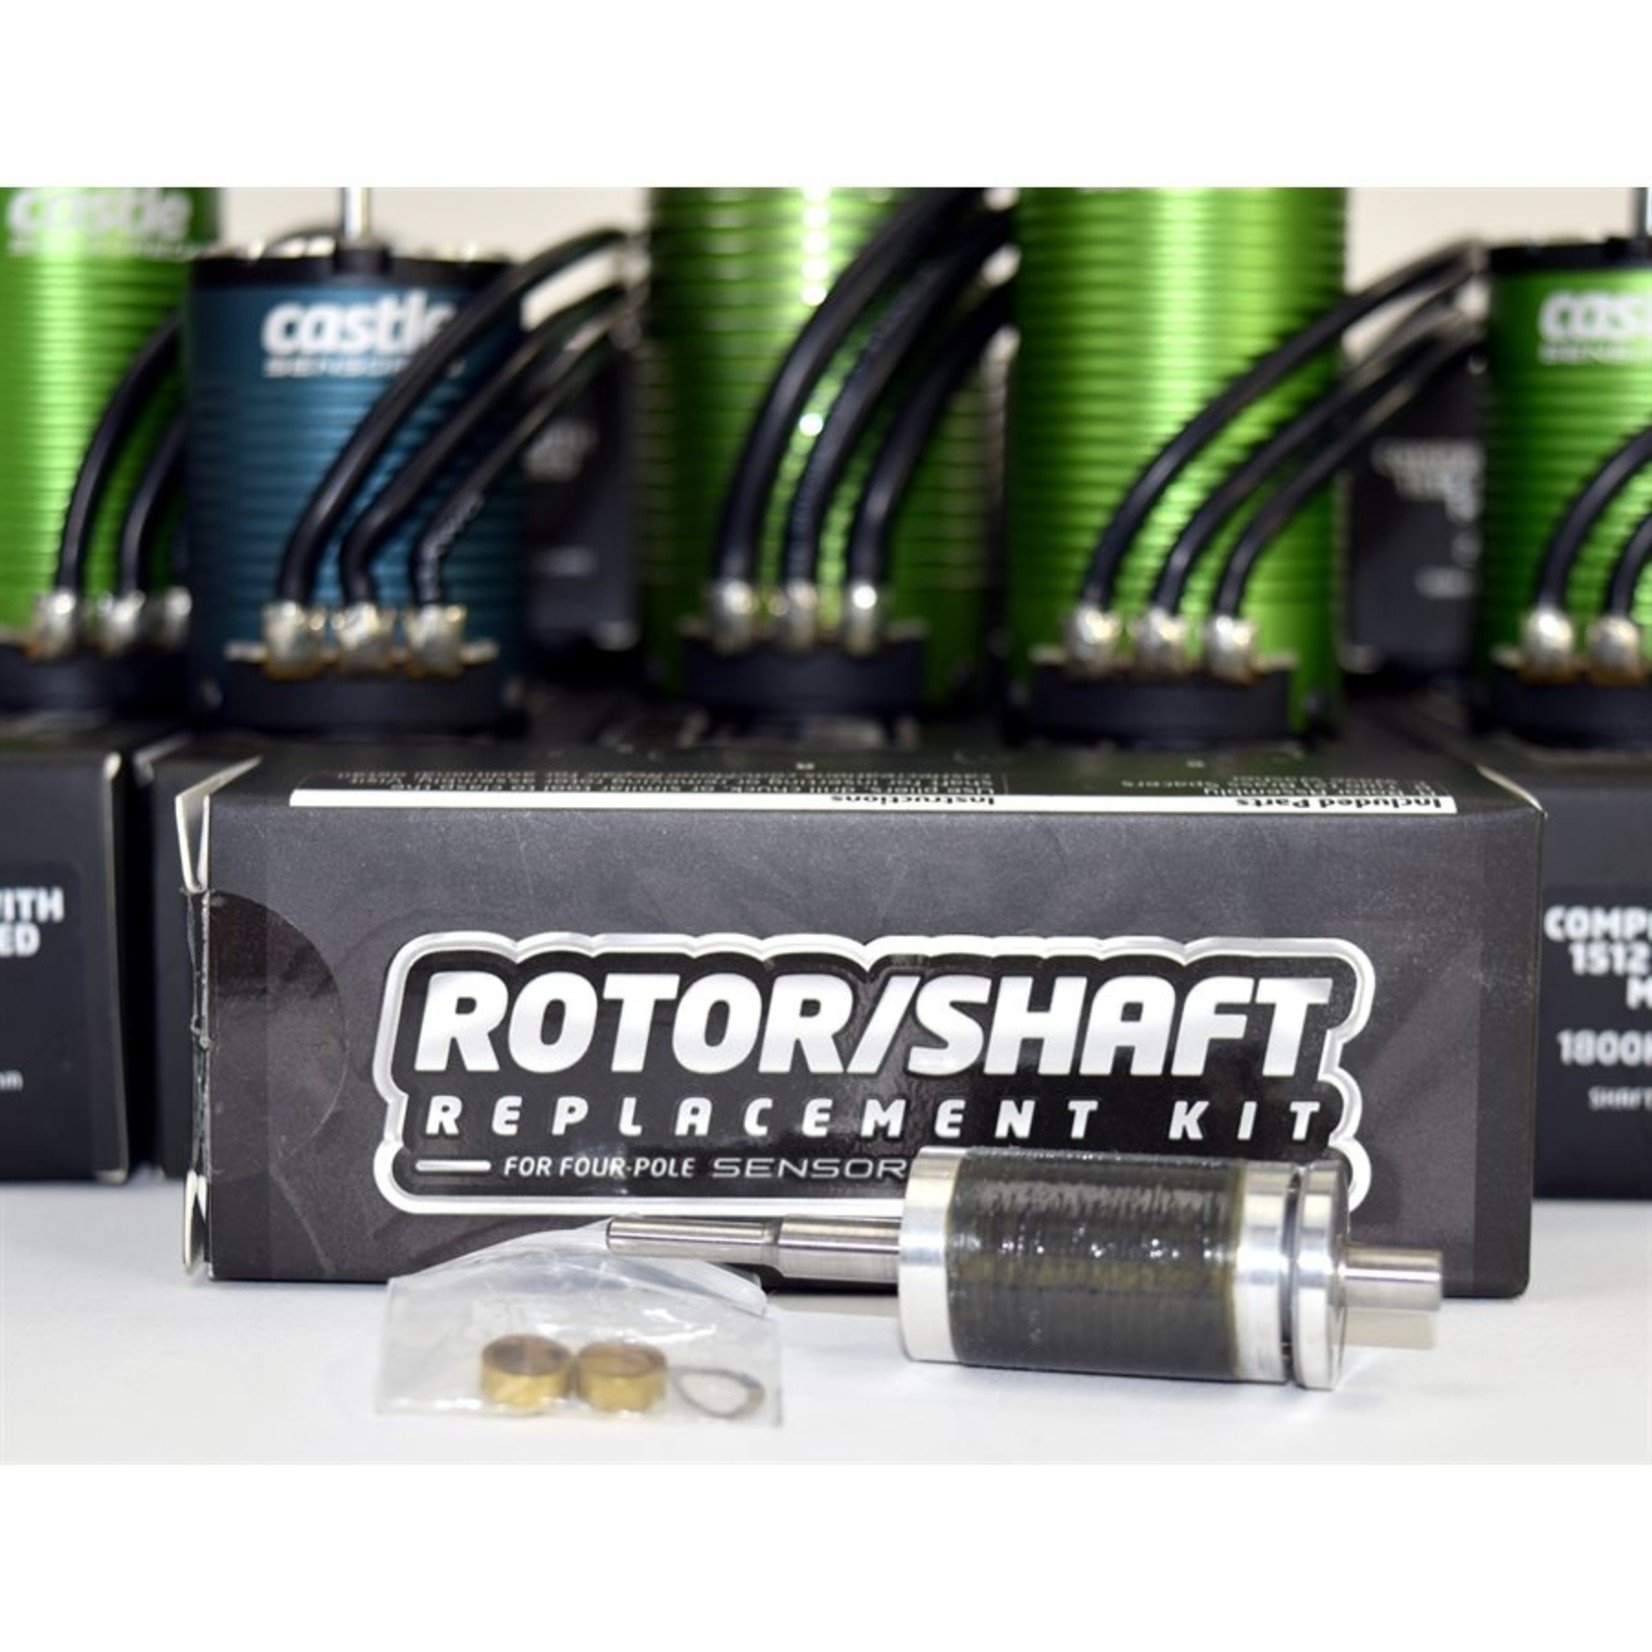 Castle Creations Rotor/Shaft Replacement Kit 1410-3800Kv